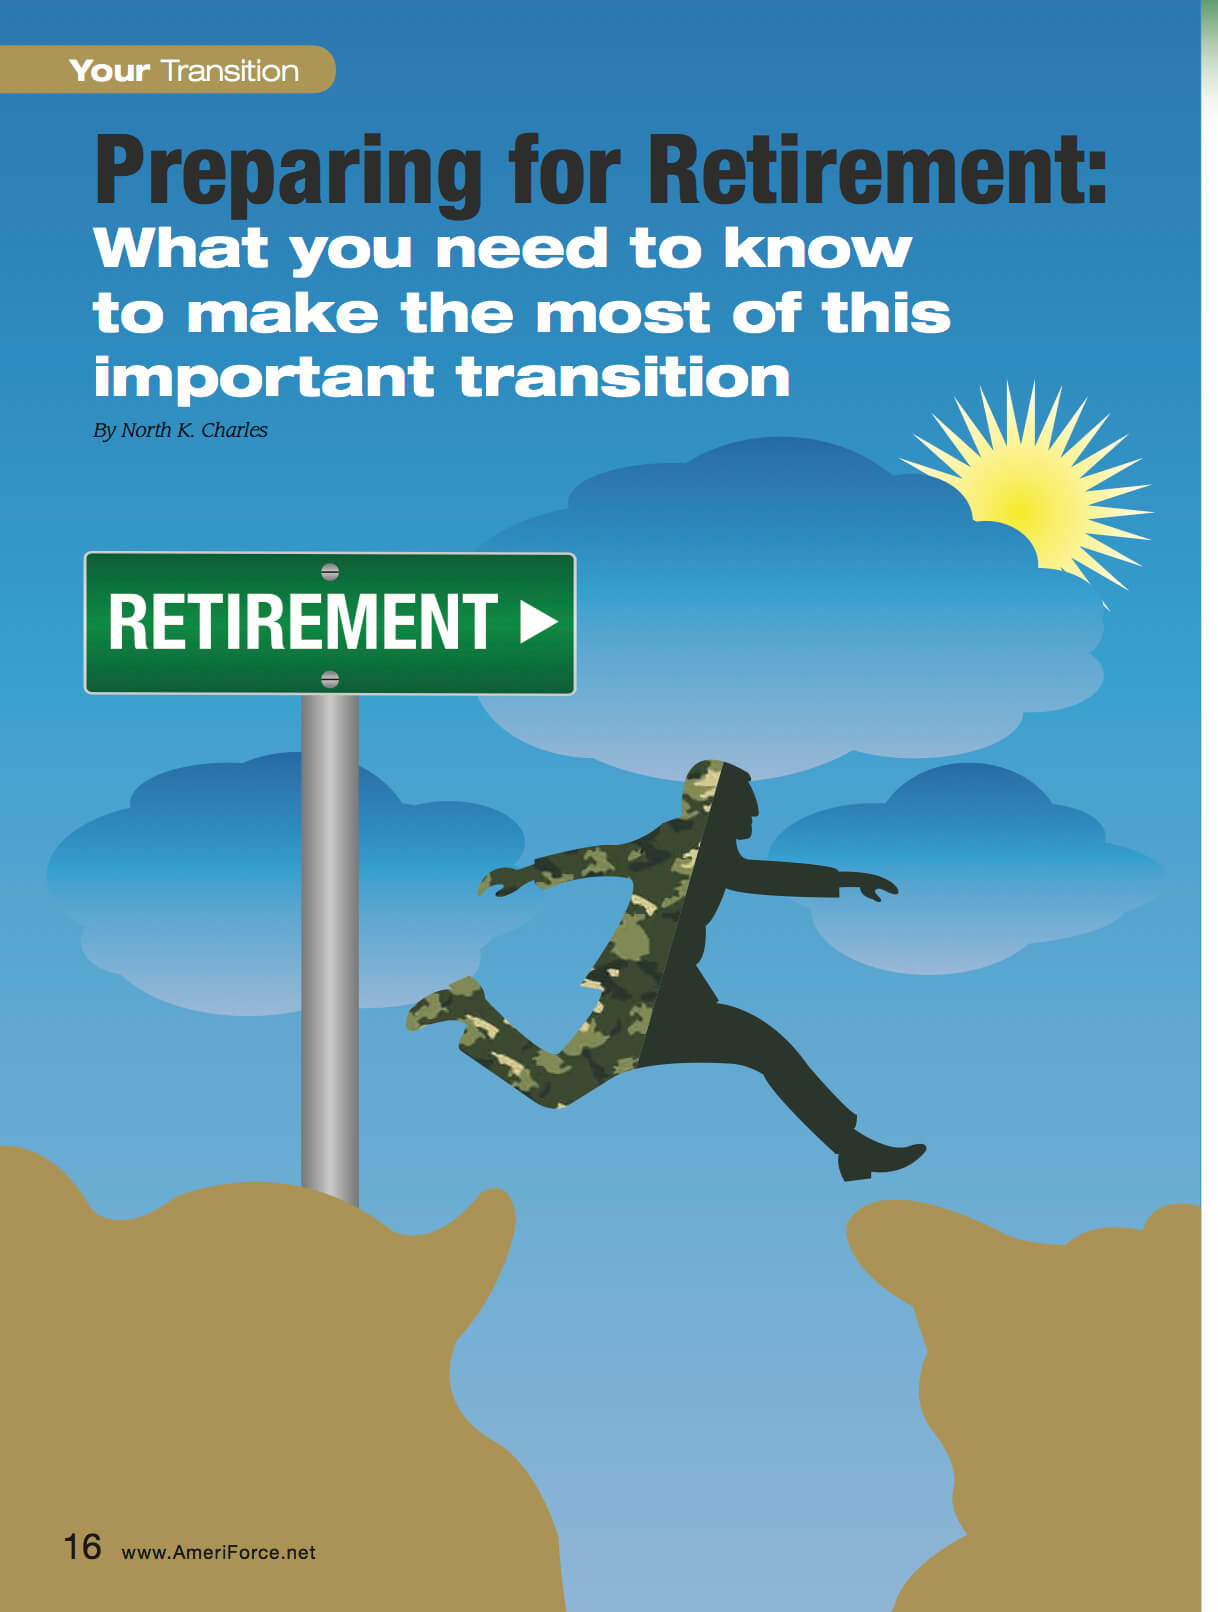 Preparing for retirement ? - what you need to know for this military transition